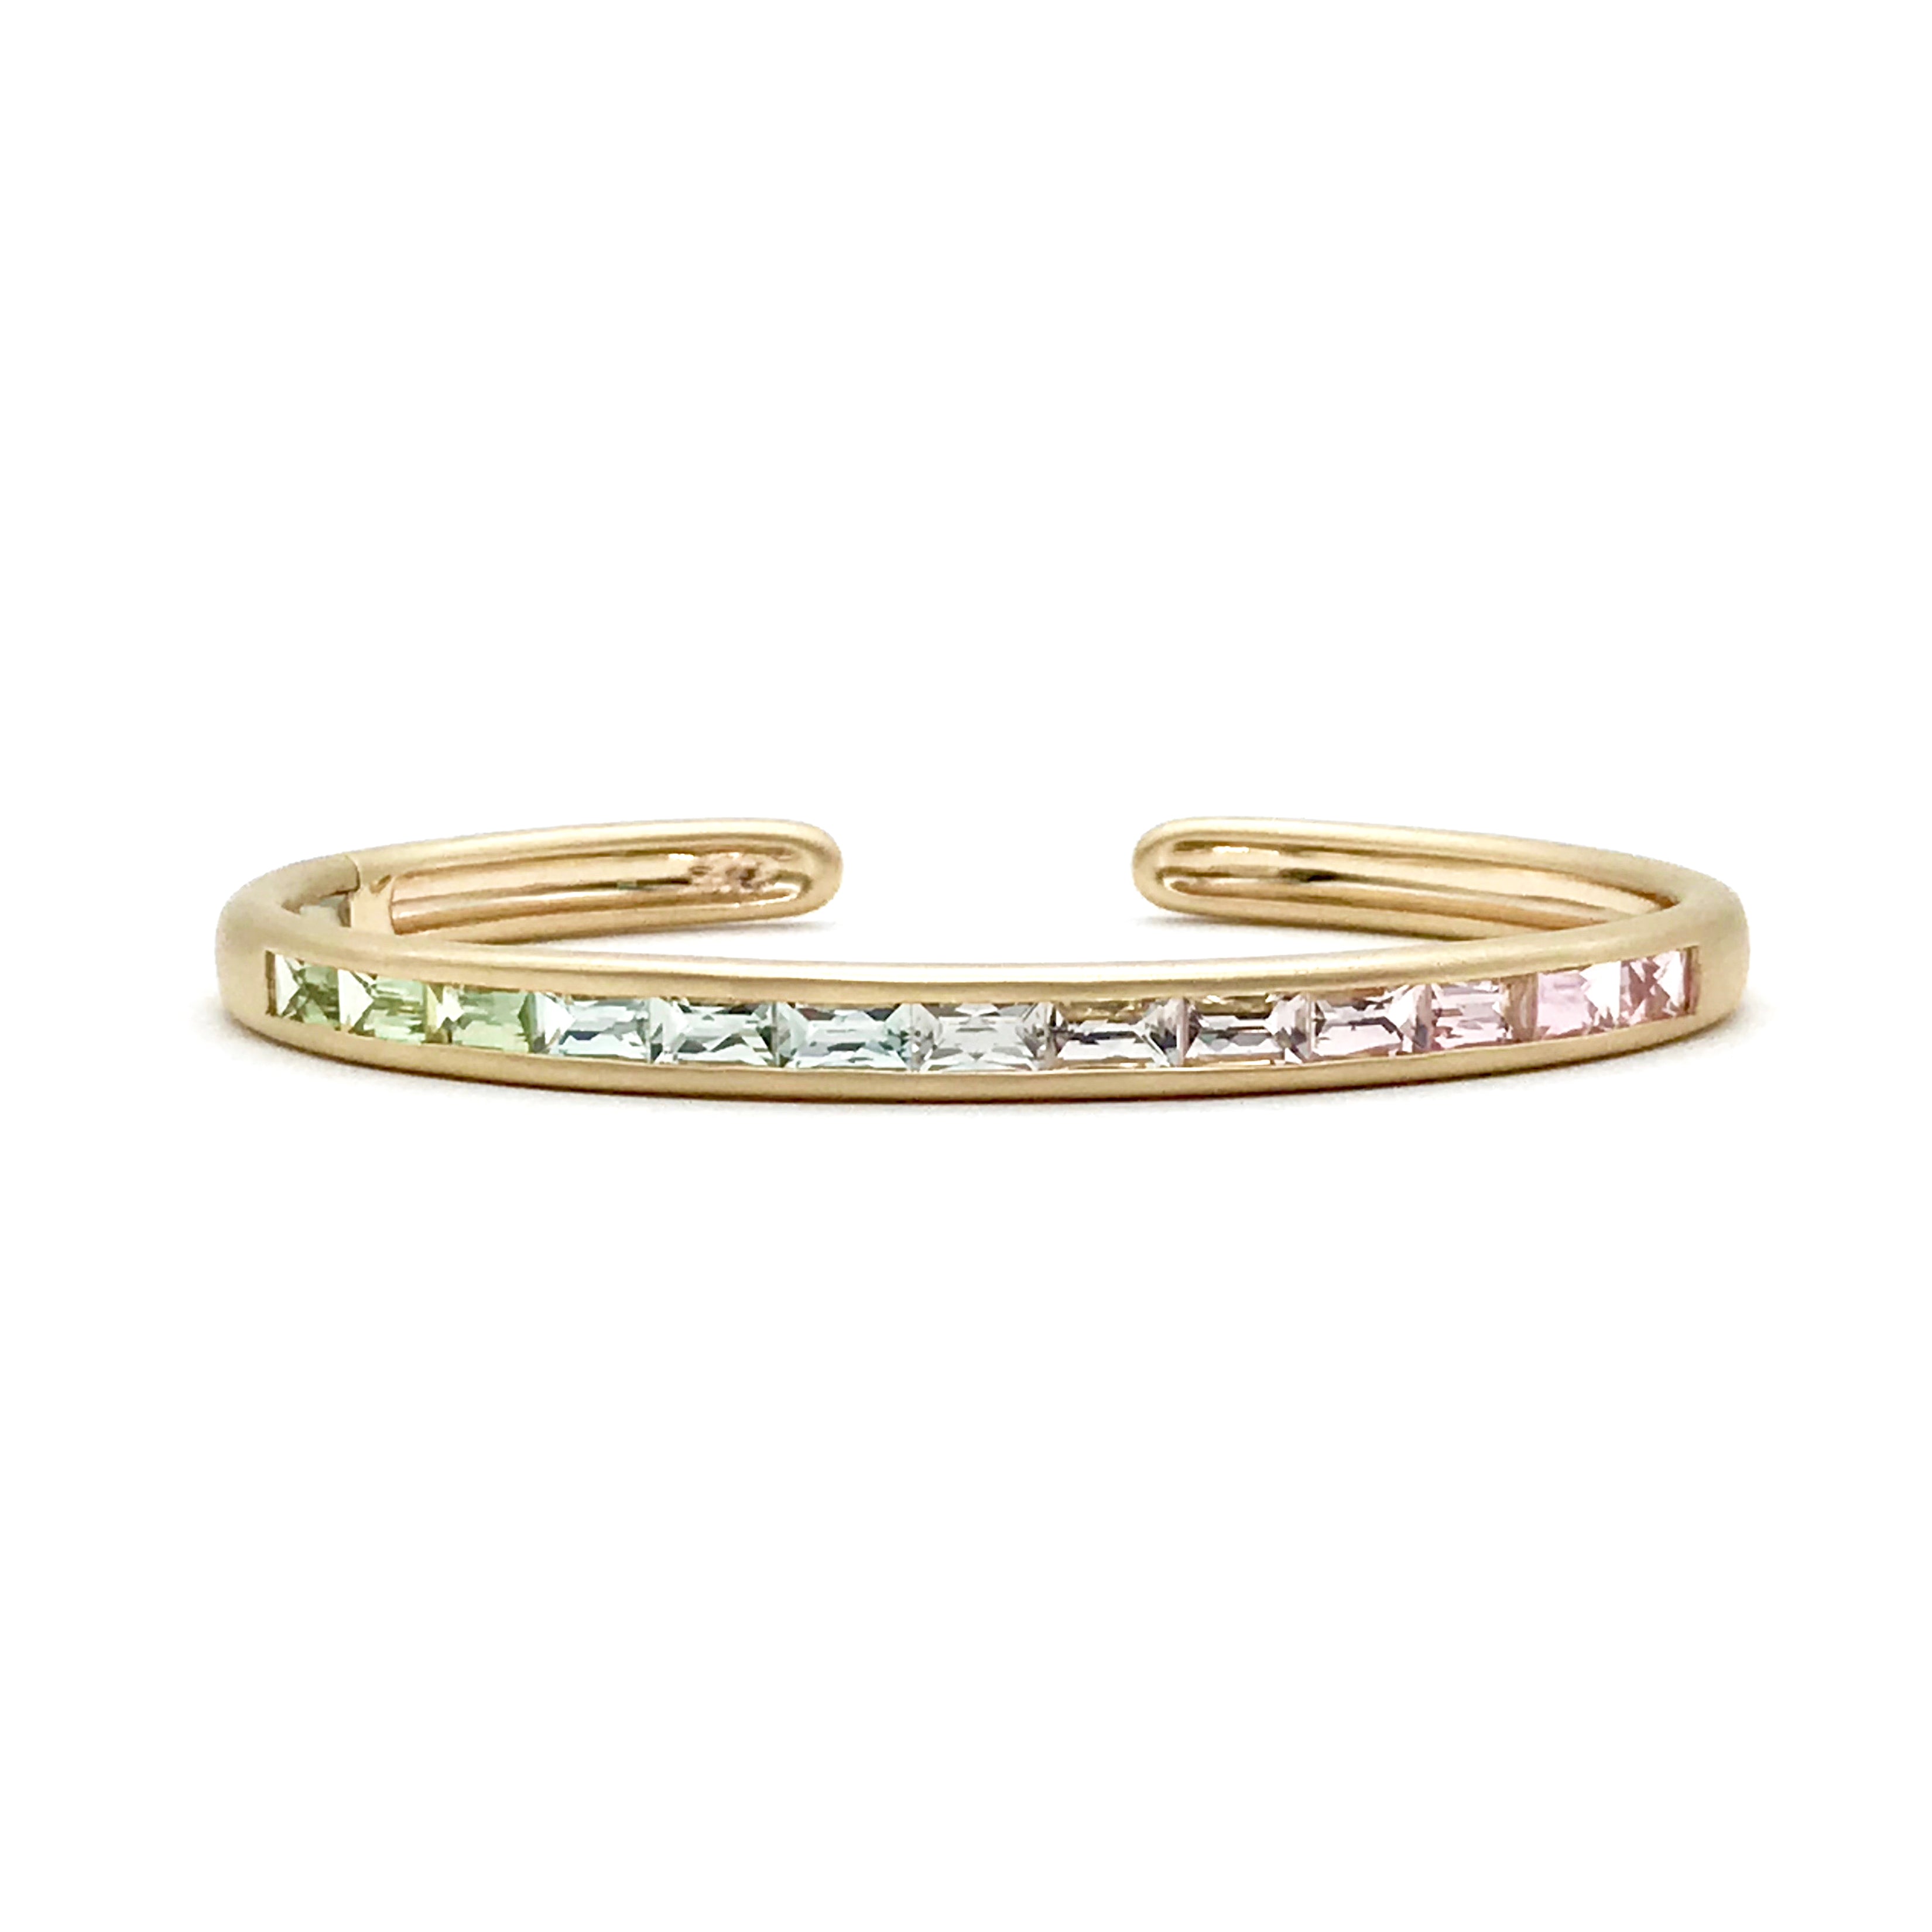 One of a Kind Hinged Oval Cuff Bracelet with Light Green To Pink Tourmaline Ombre Baguettes